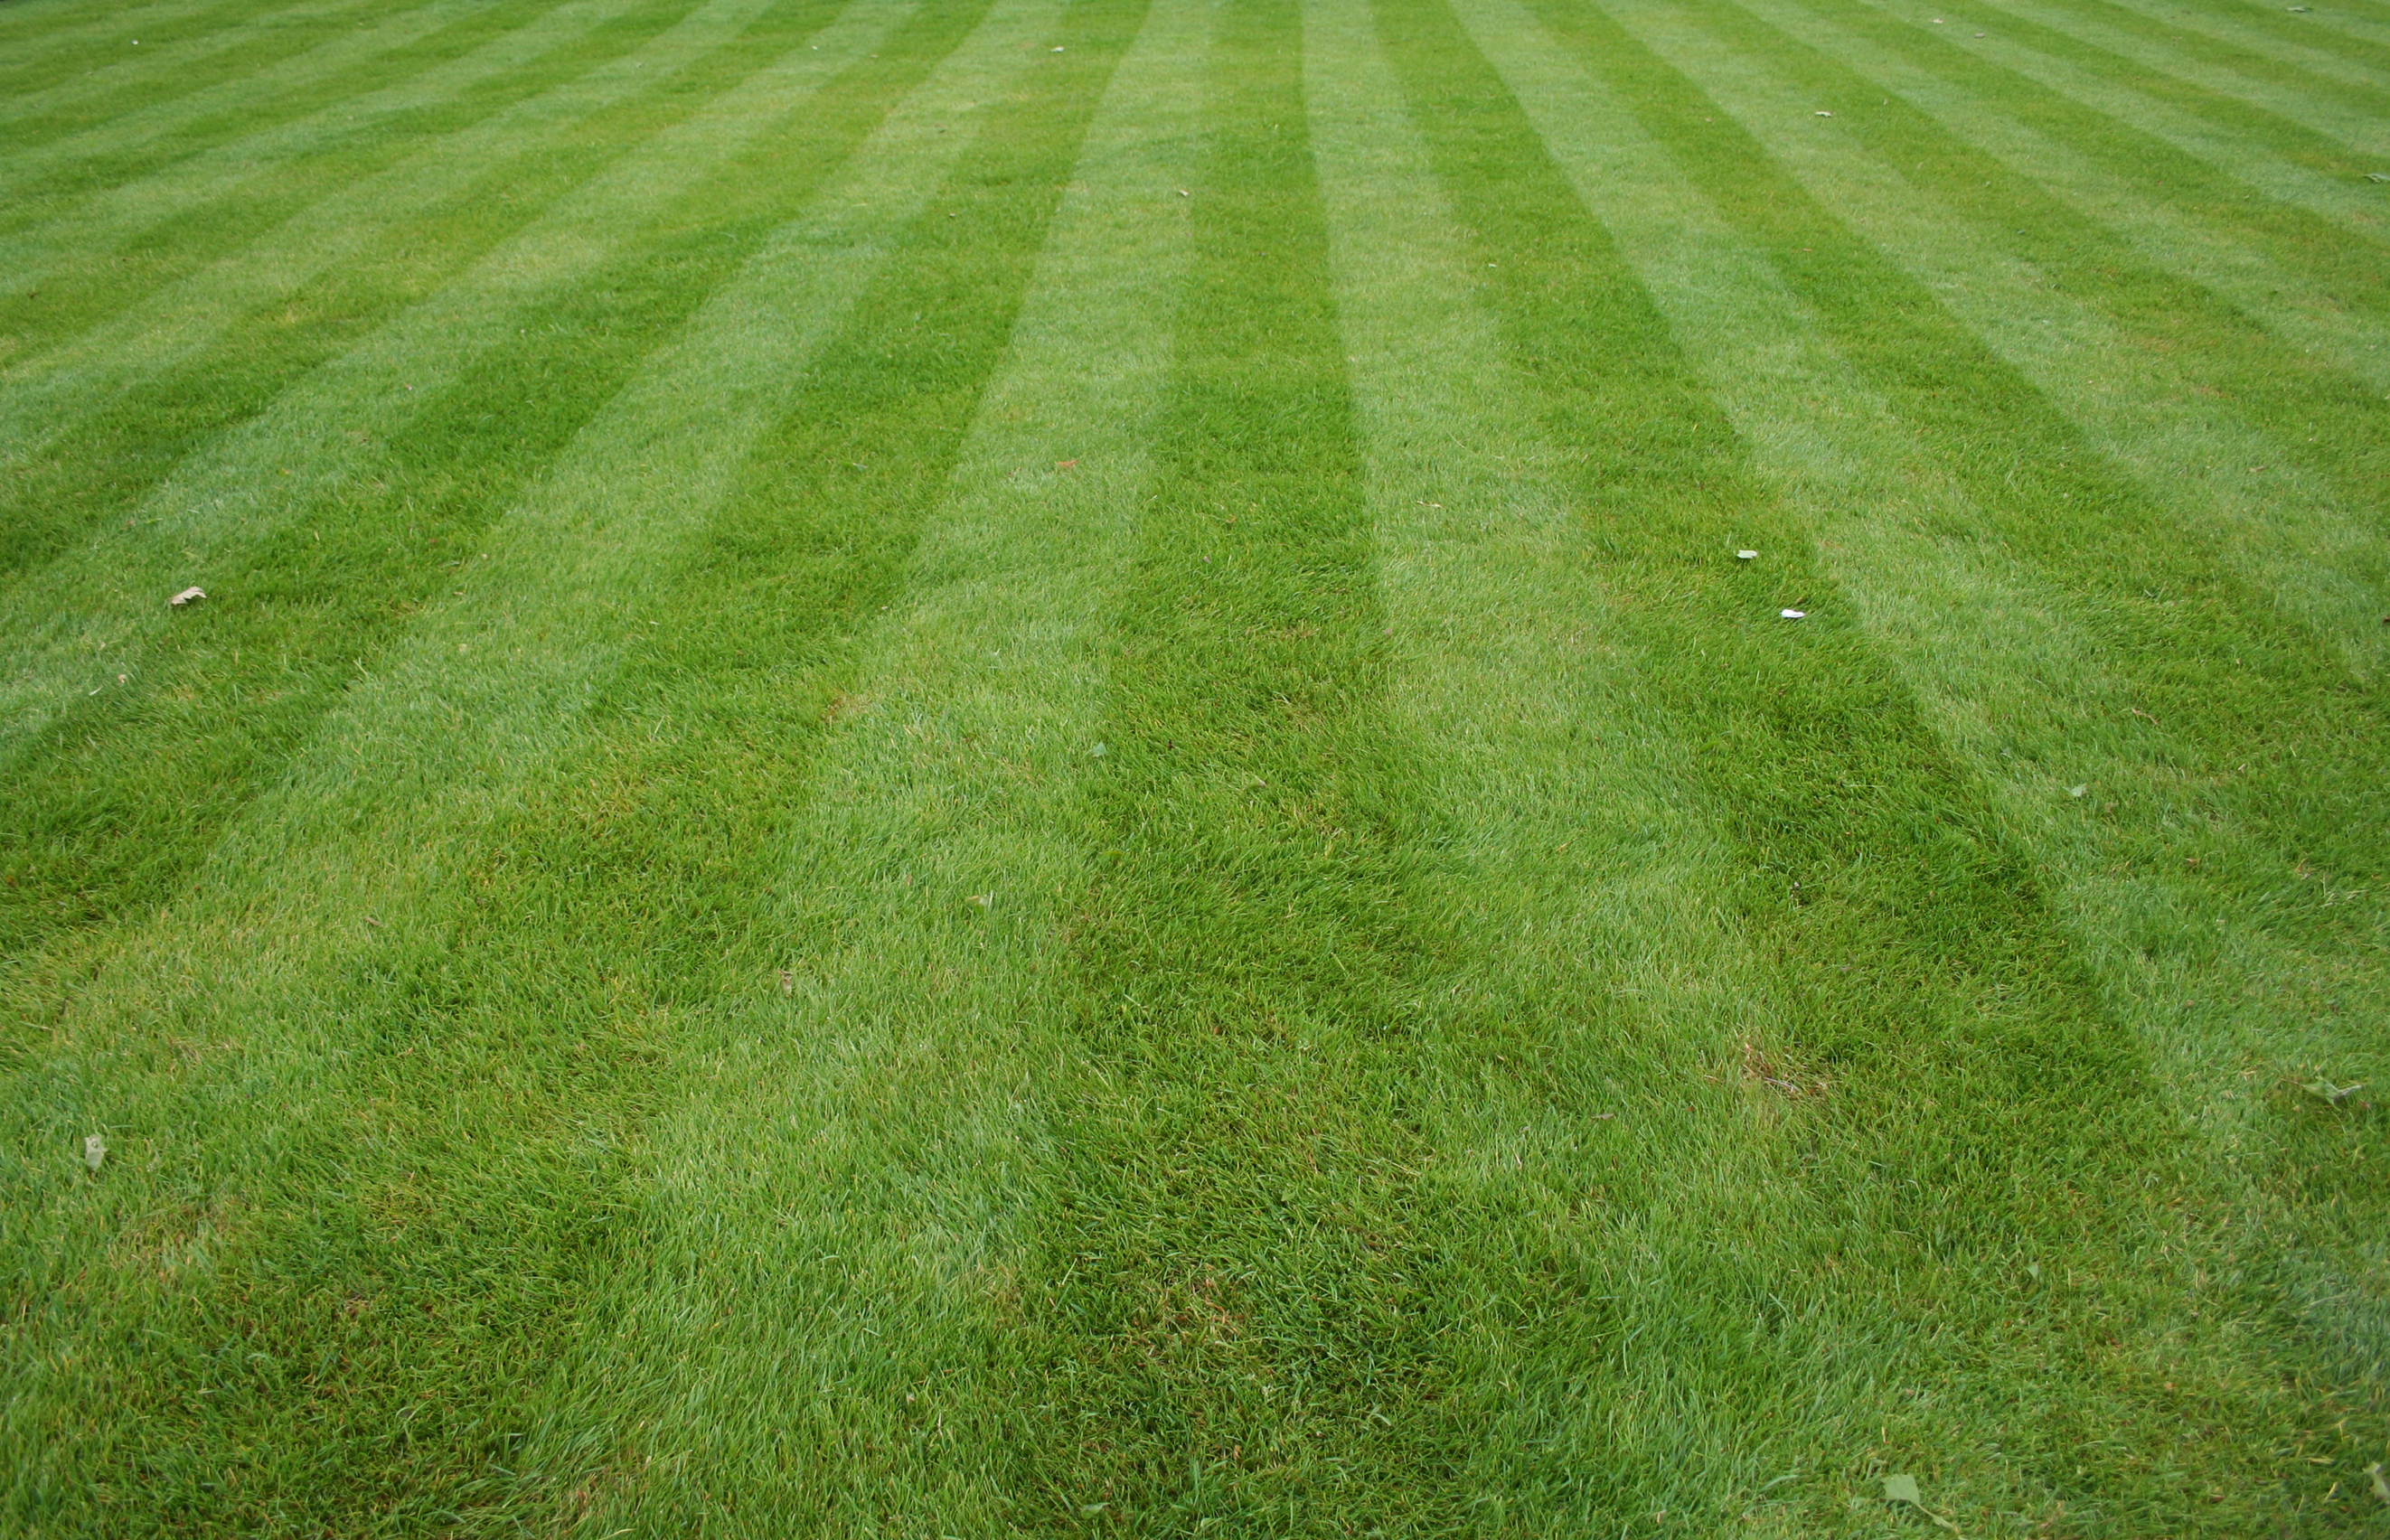 10 Reasons You Don't Need a Grass Lawn - The Good Human